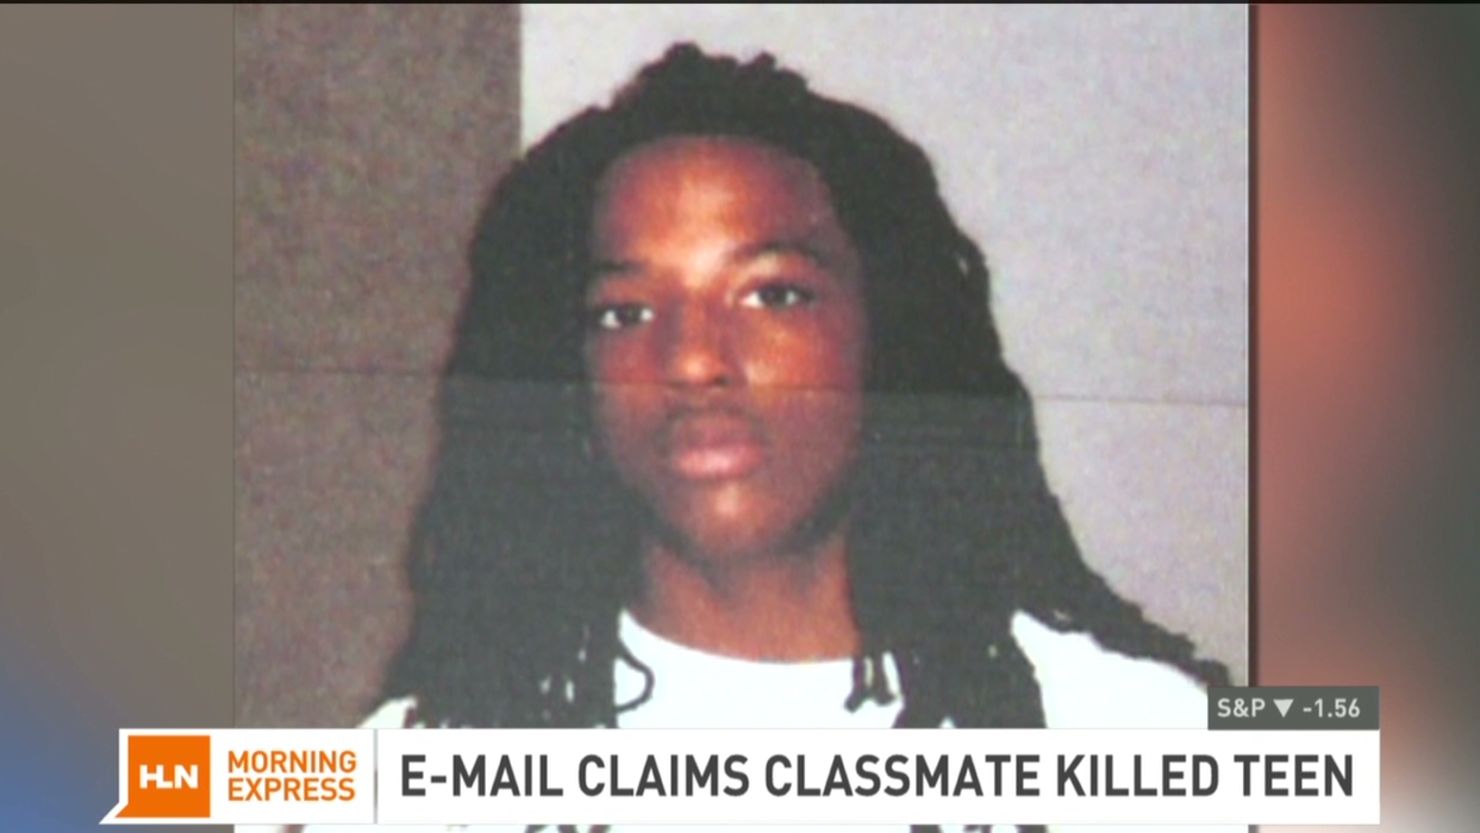 Kendrick Johnson's body was found in the center of a rolled gym mat at Lowndes High School on January 11, 2013.